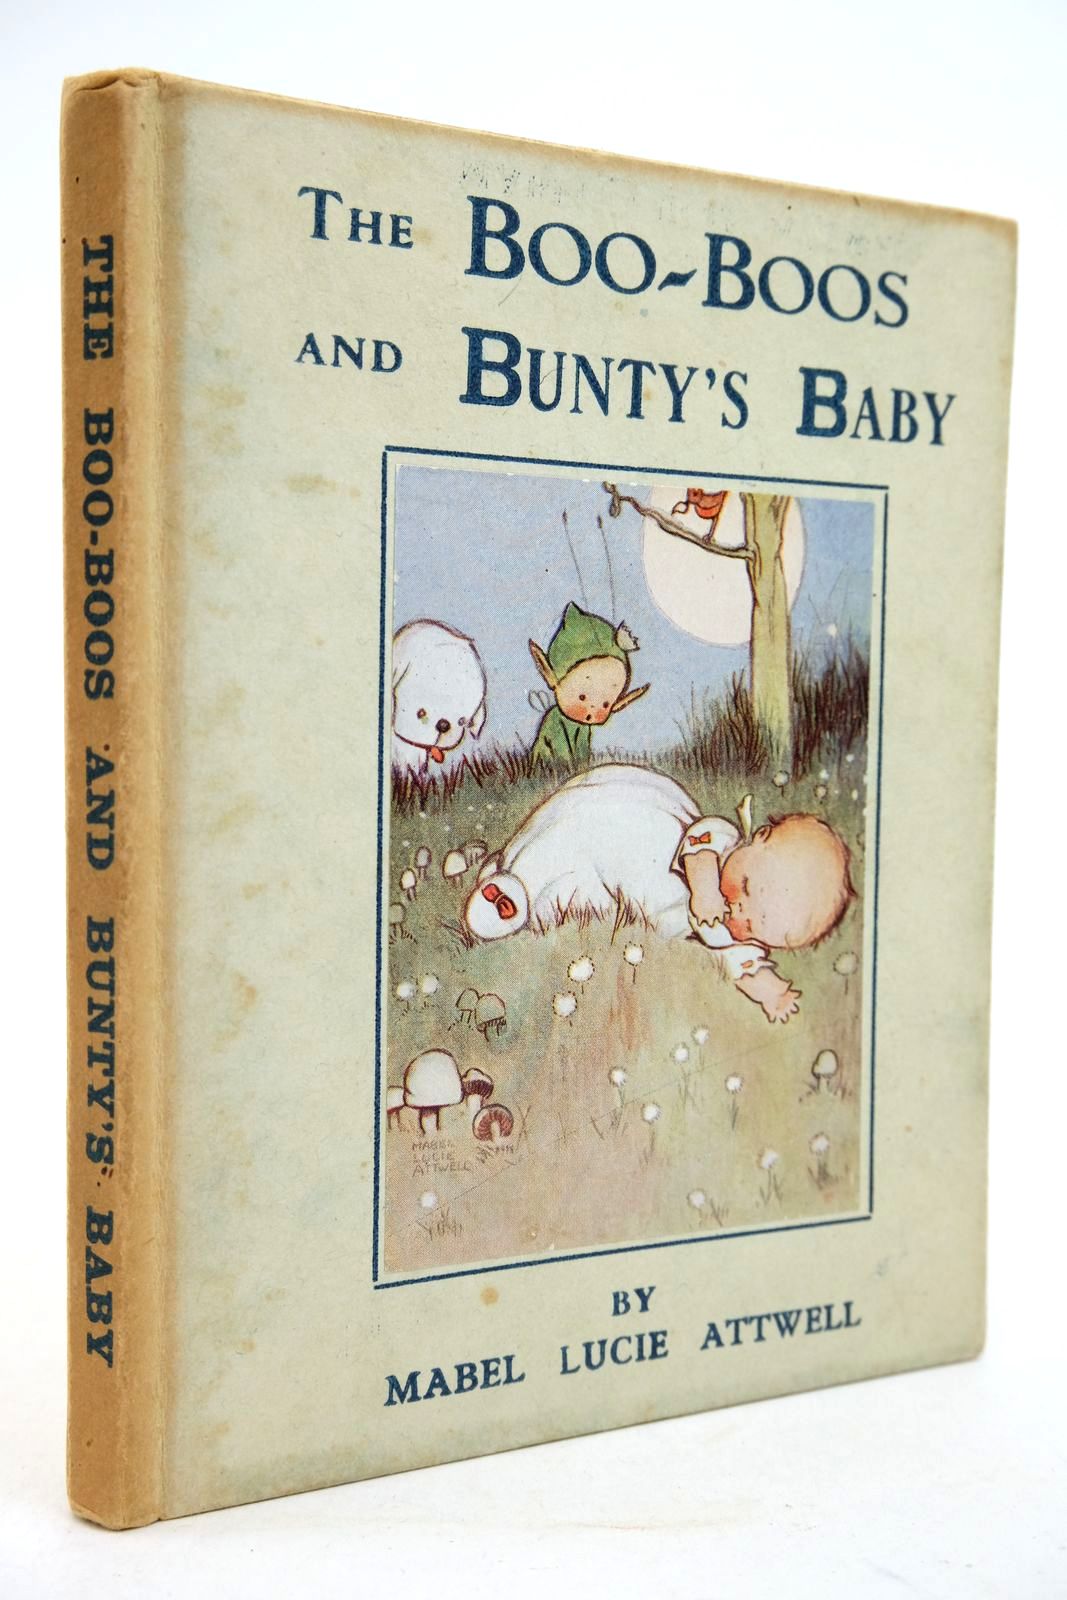 Photo of THE BOO-BOOS AND BUNTY'S BABY written by Attwell, Mabel Lucie illustrated by Attwell, Mabel Lucie published by Valentine & Sons Ltd. (STOCK CODE: 2140943)  for sale by Stella & Rose's Books